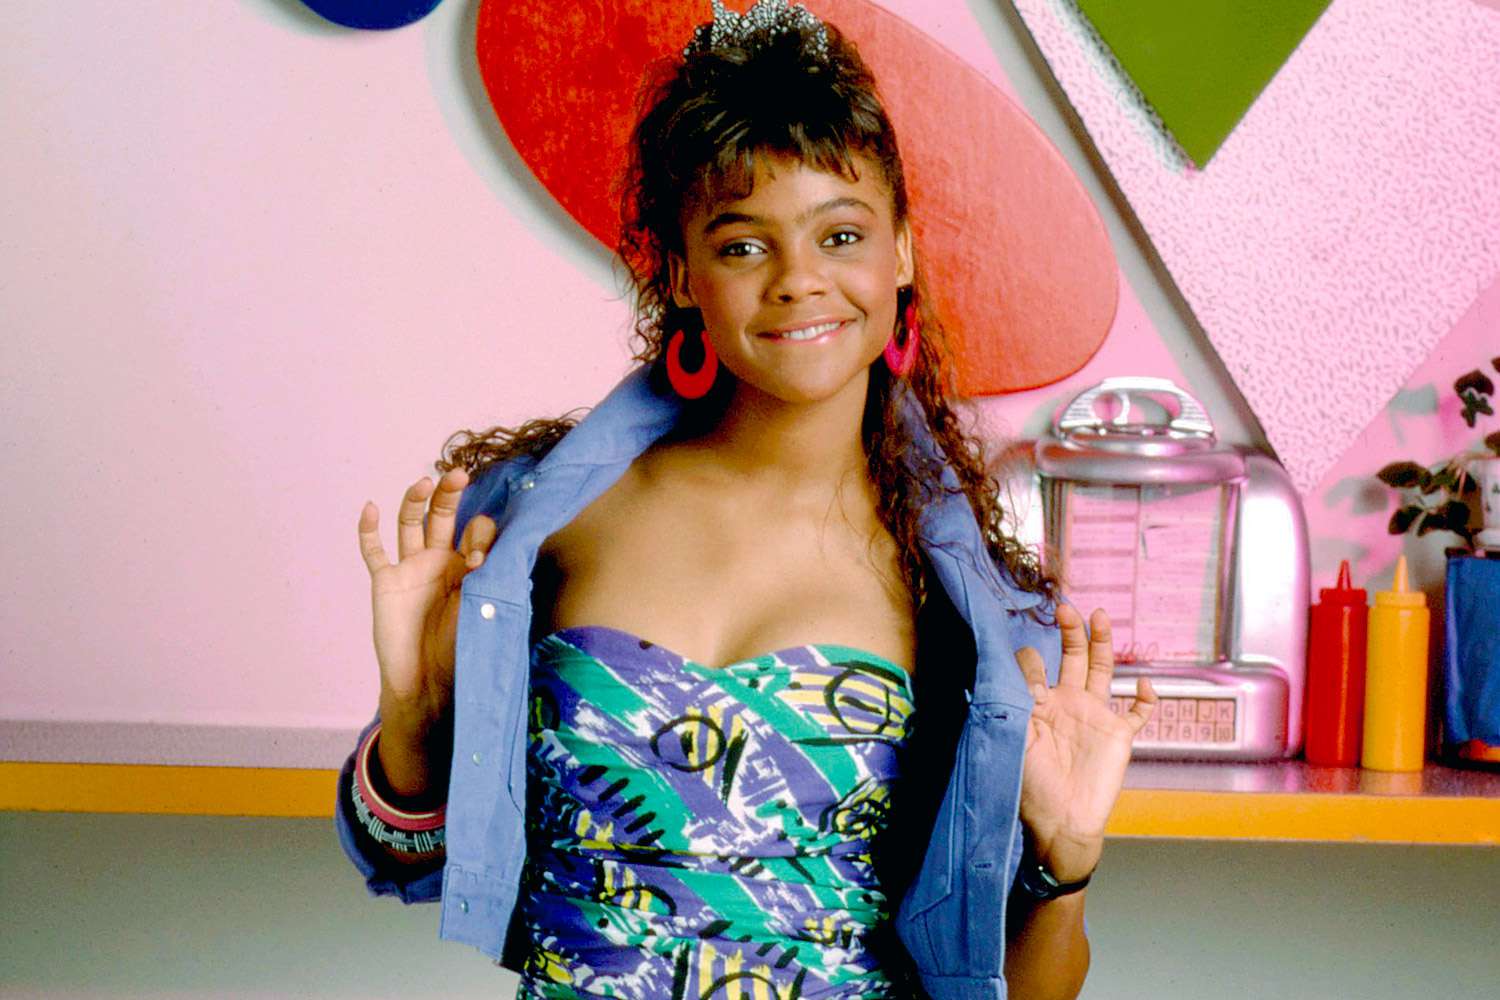 Time out! Here's your first look at Lark Voorhies in 'Saved by the Bell' revival